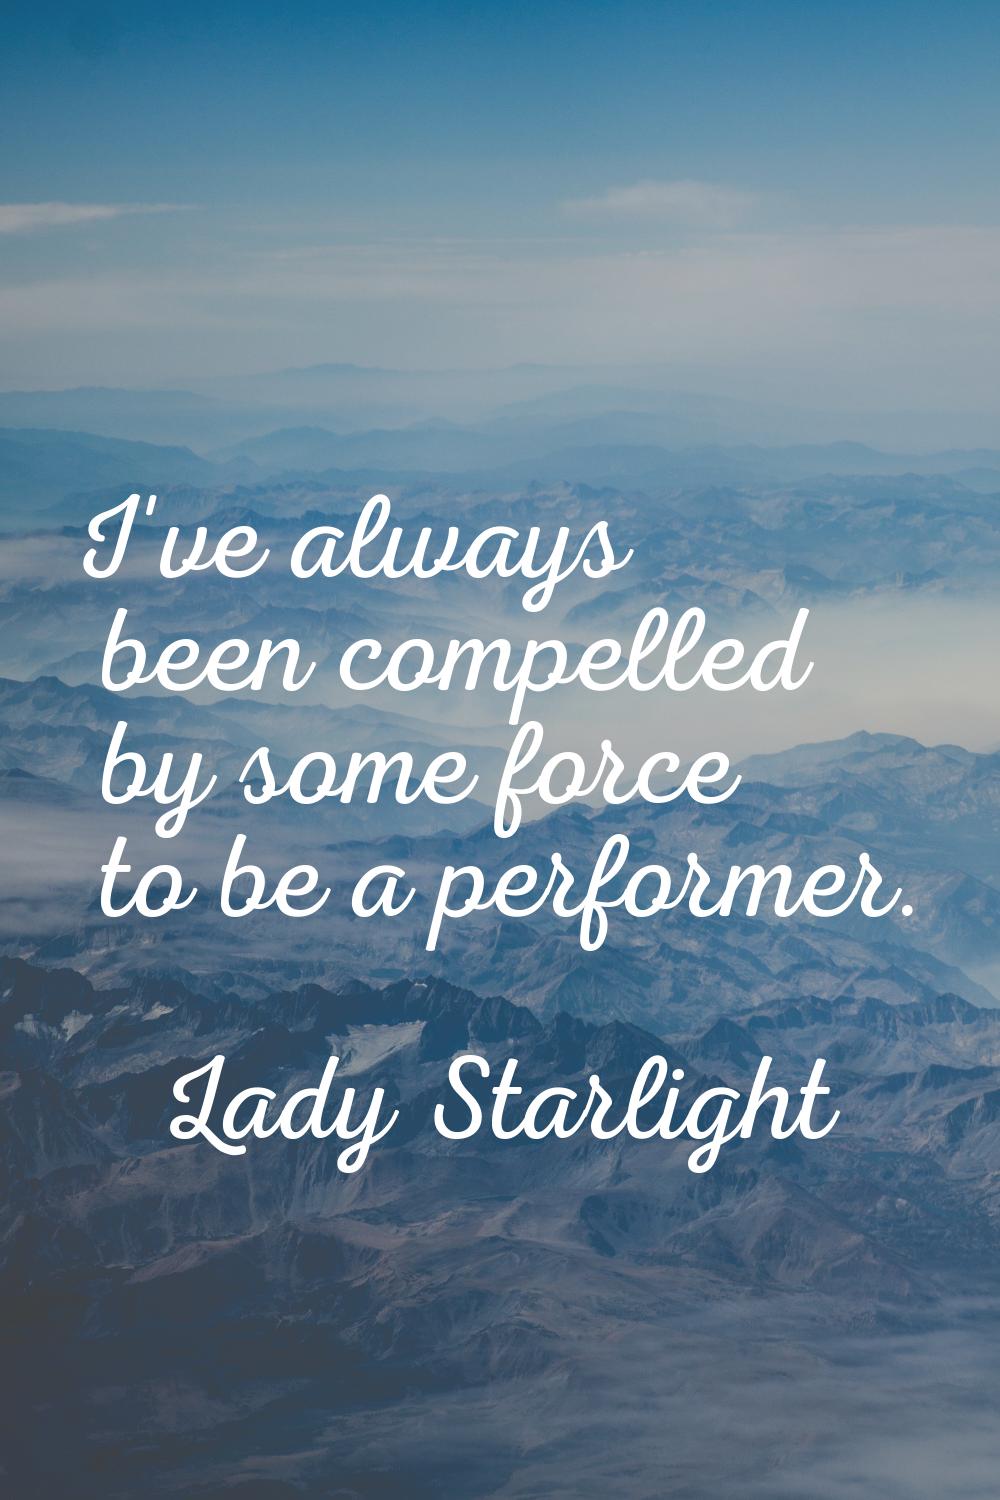 I've always been compelled by some force to be a performer.